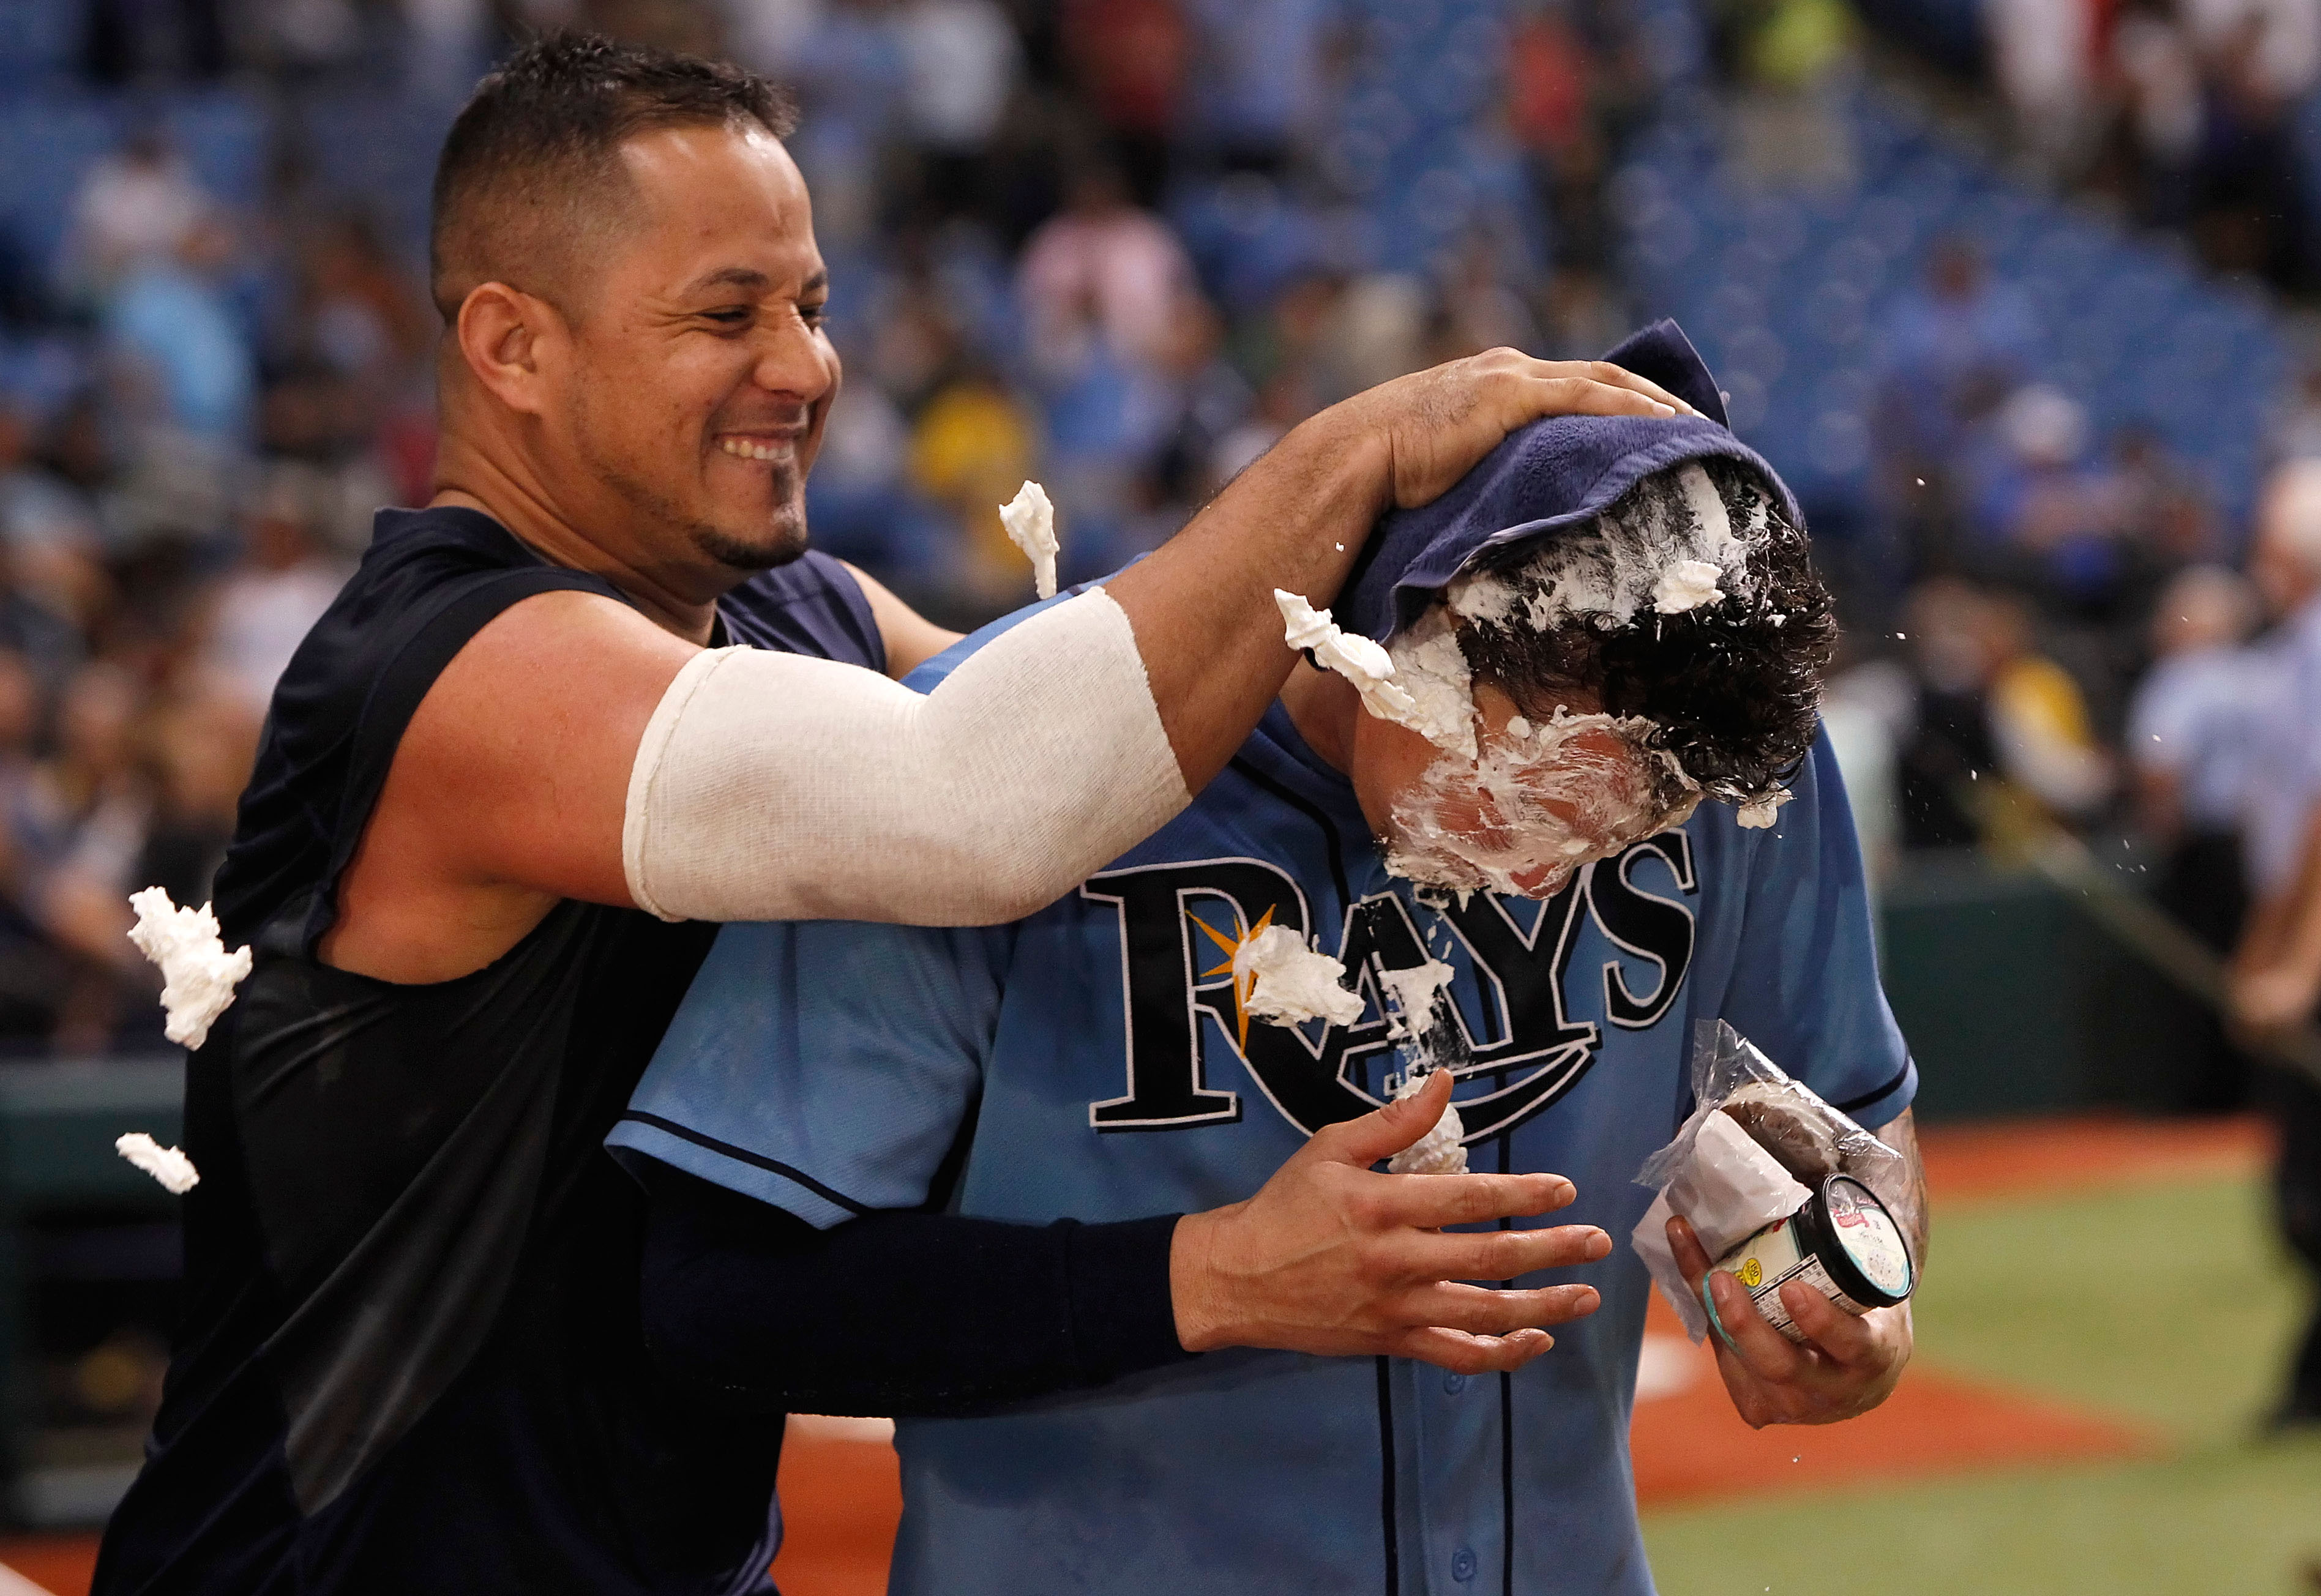 Happy Pi Day! Here’s 12 photos of MLB players getting celebratory pies